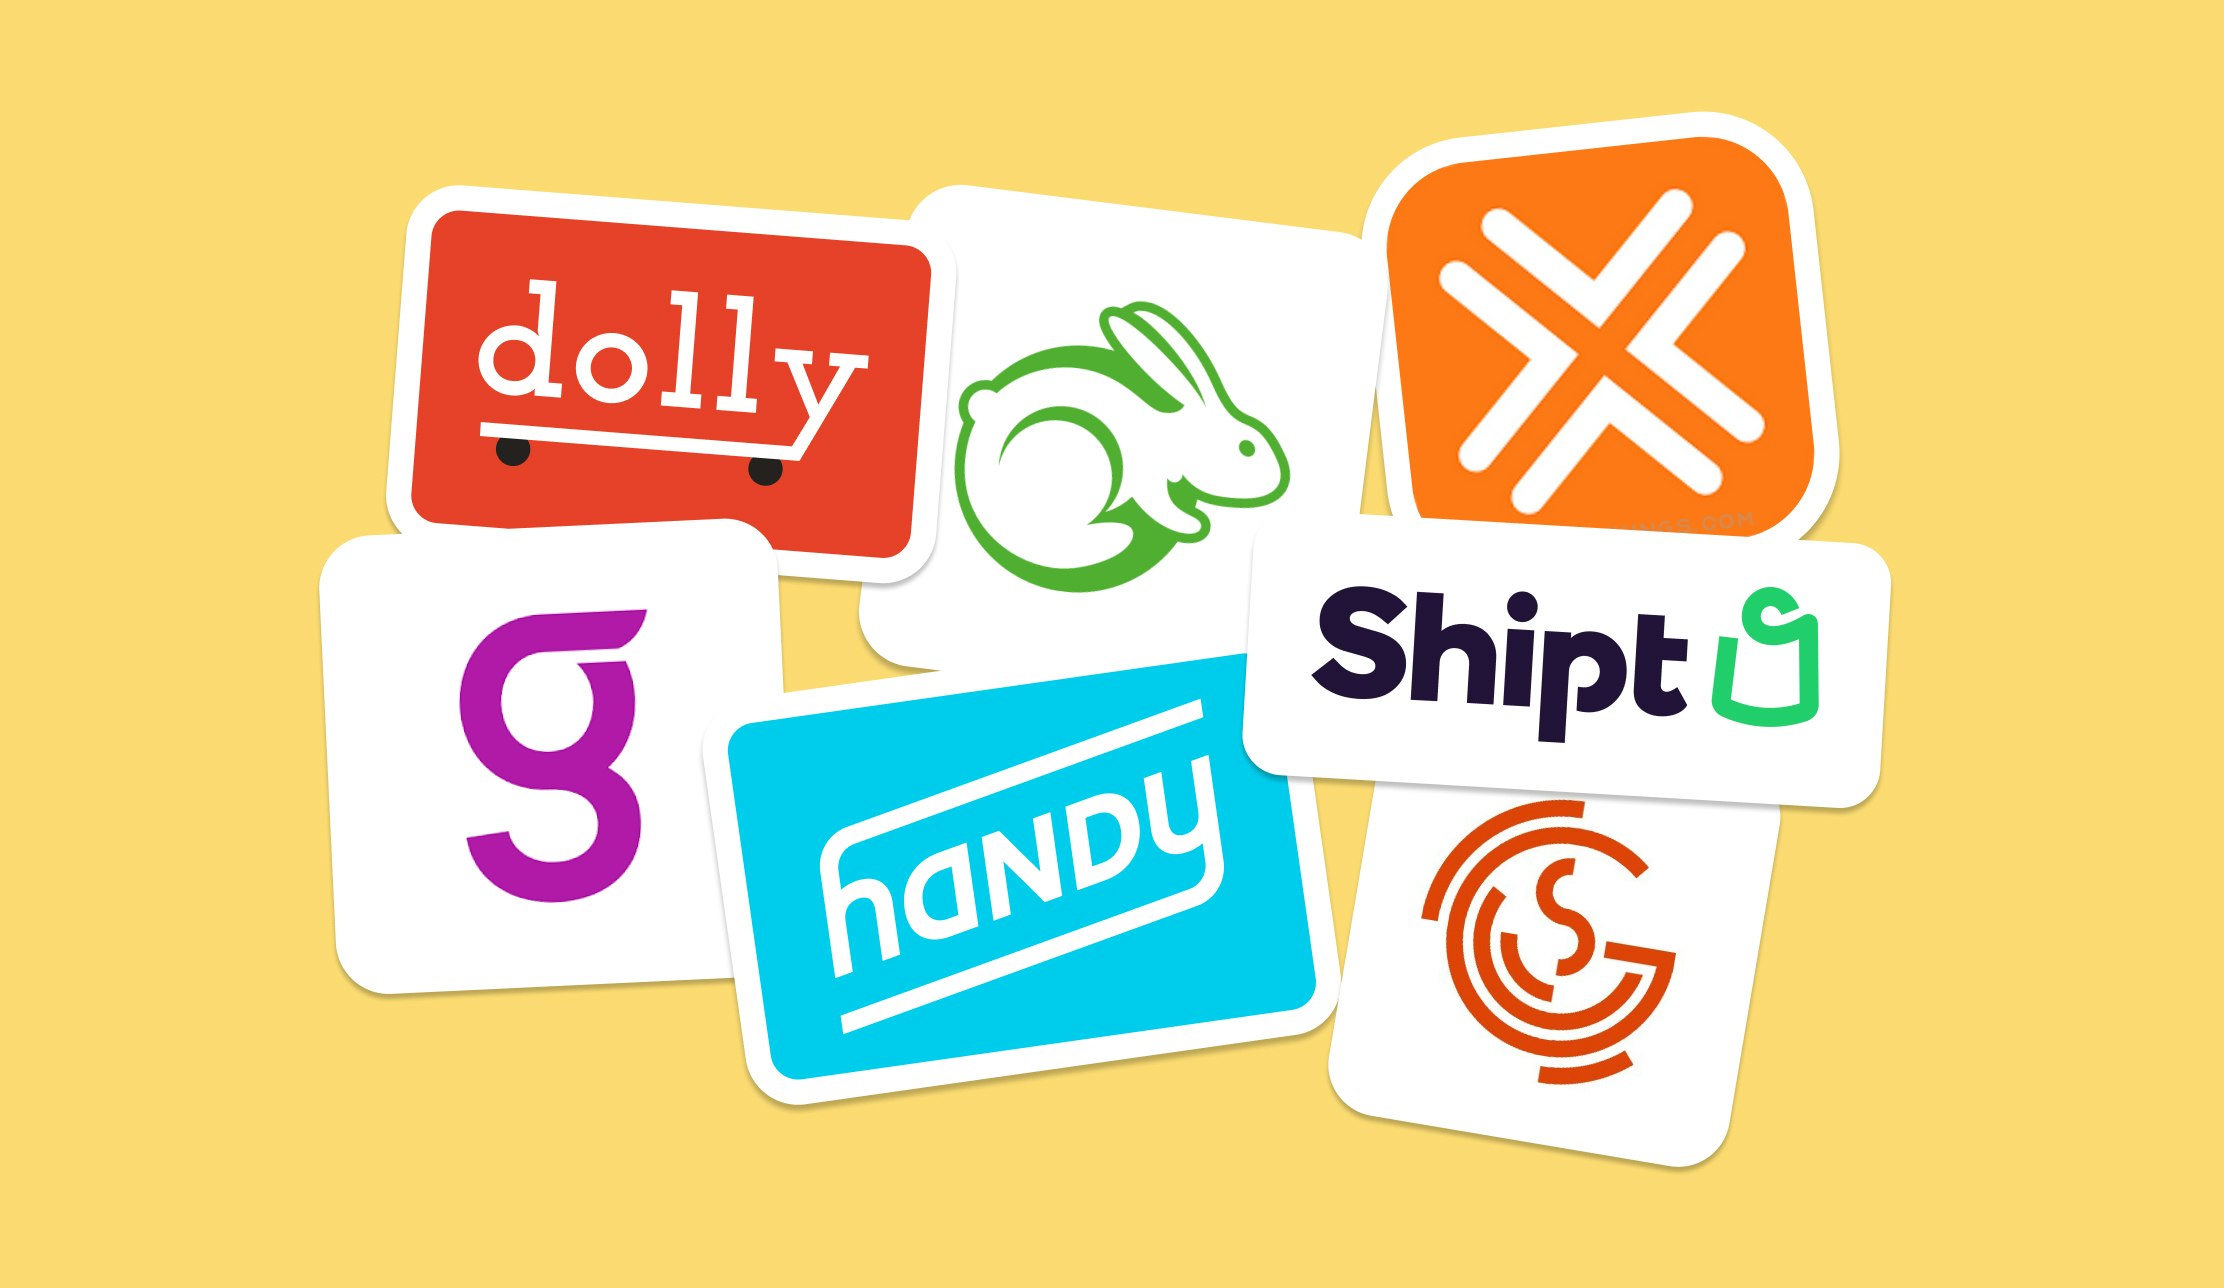 Logos for Dolly, Task Rabbit, Shipt, Handy, GigSmart, and Get Around